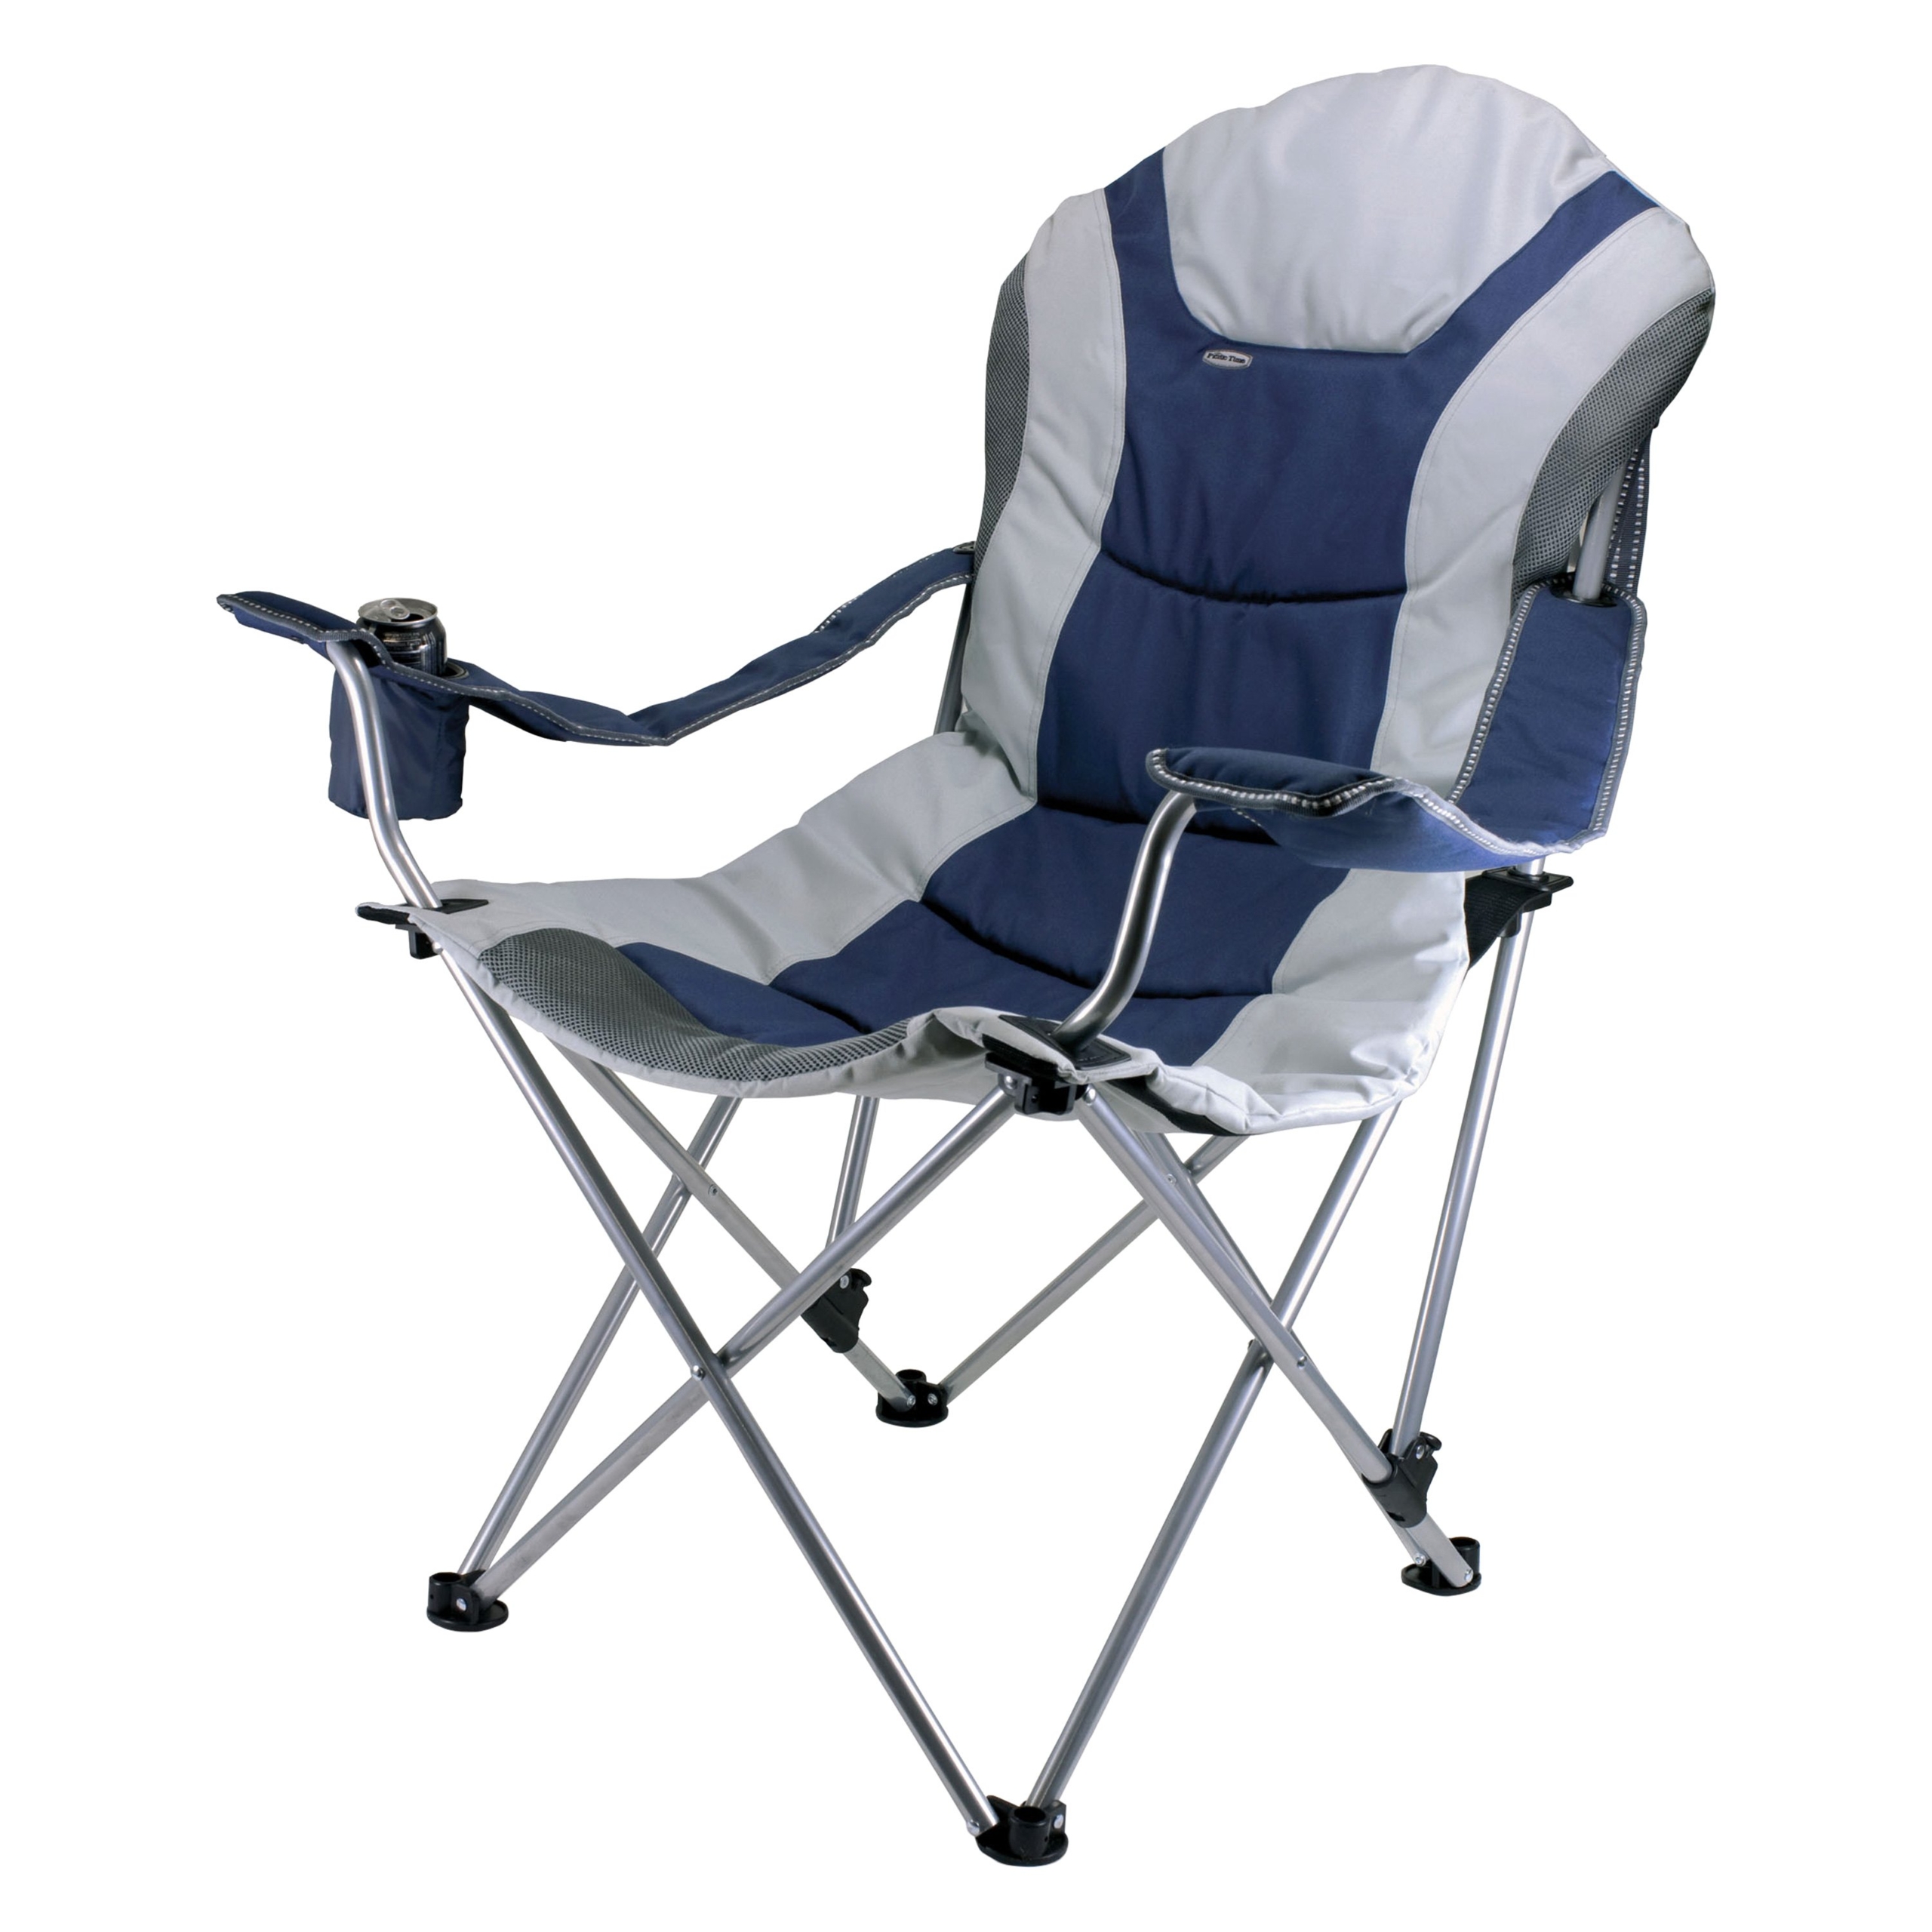 Picnic Time Portable Reclining Camp Chair, Navy